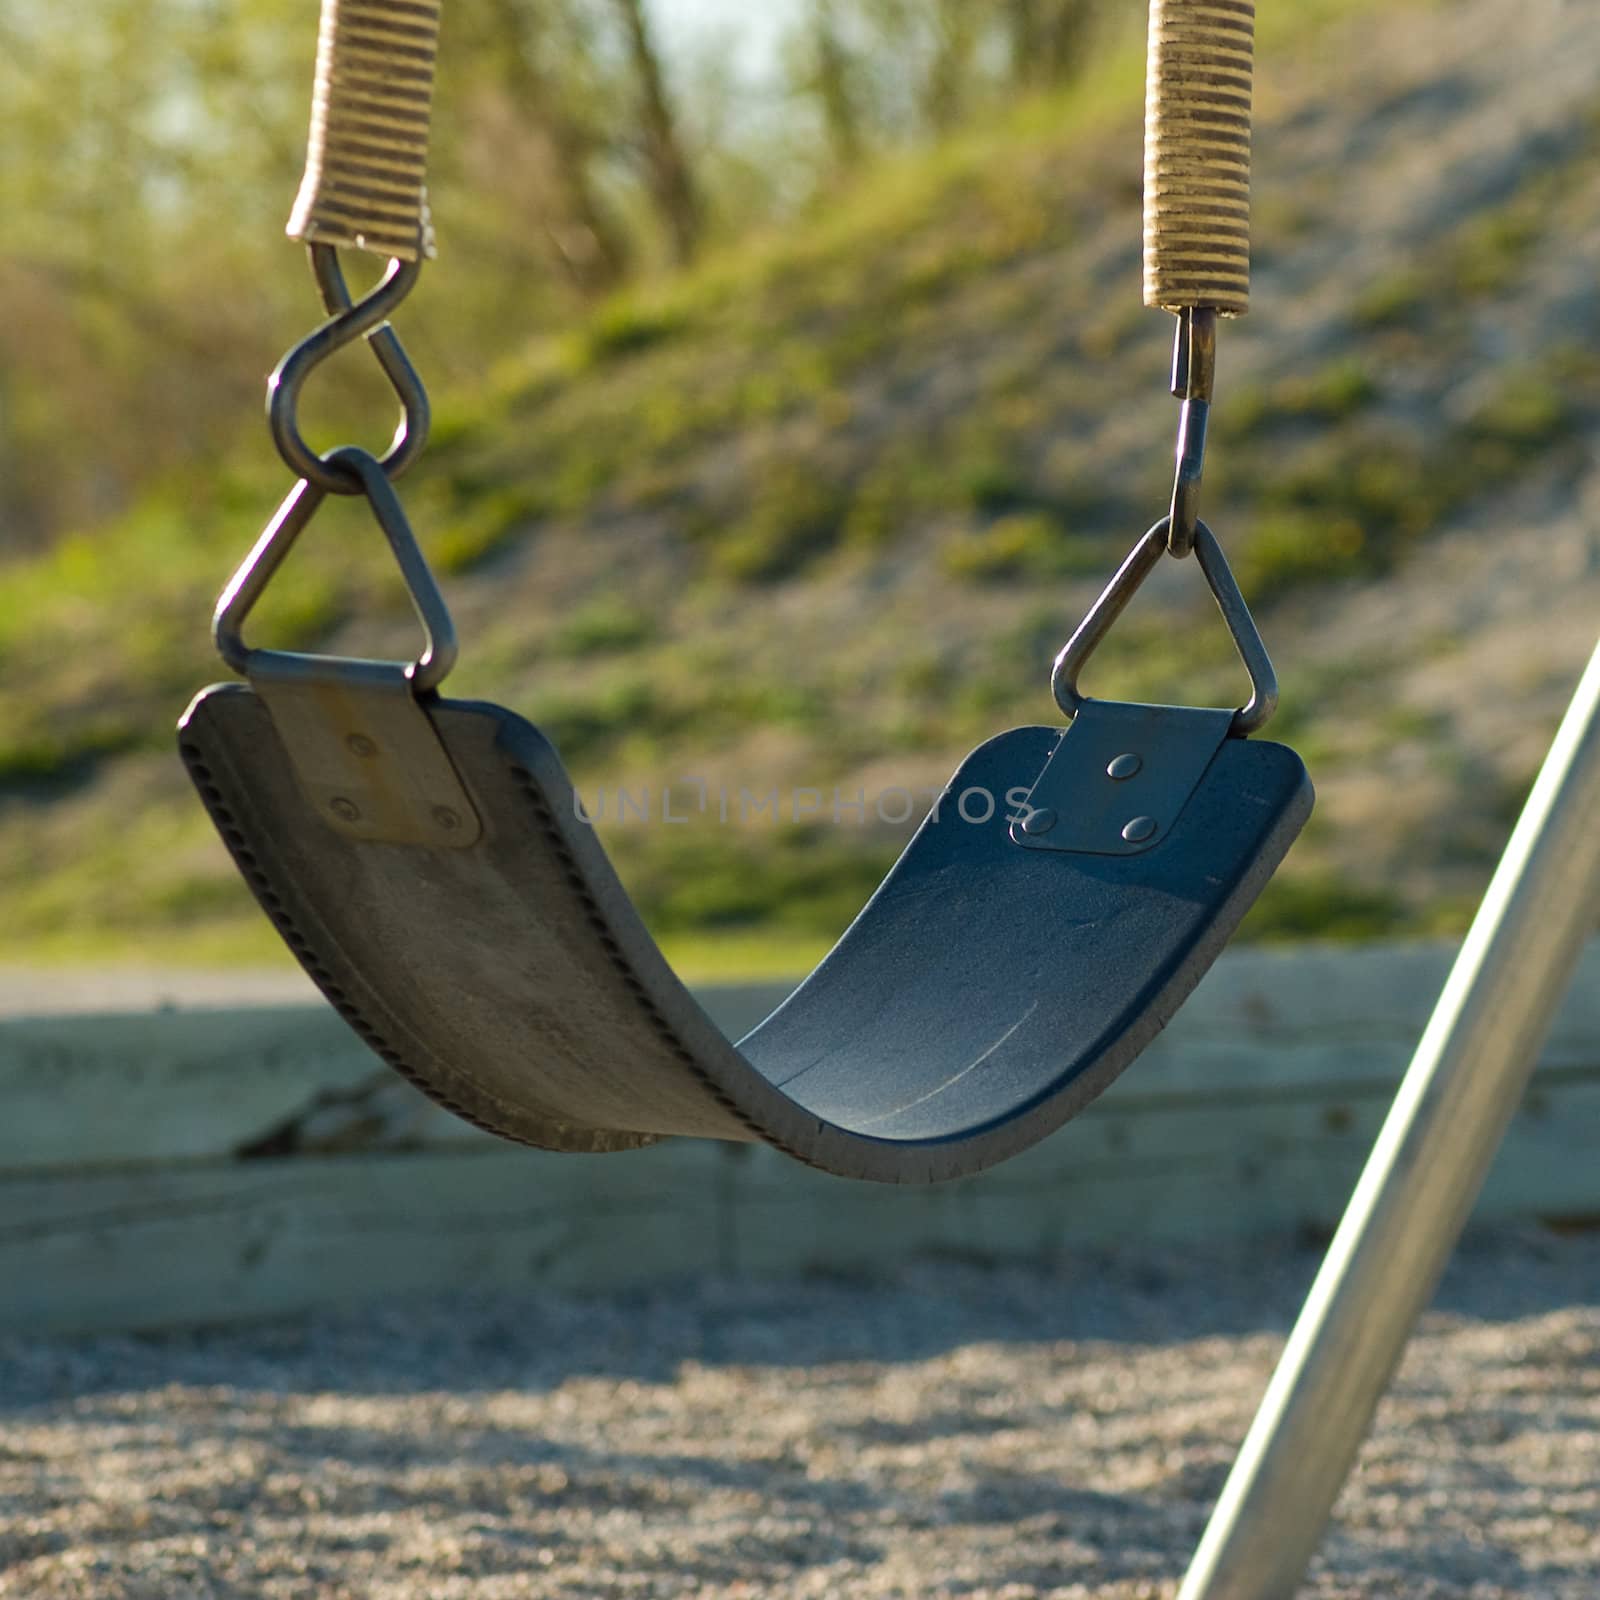 A single swing, sitting empty on a playground